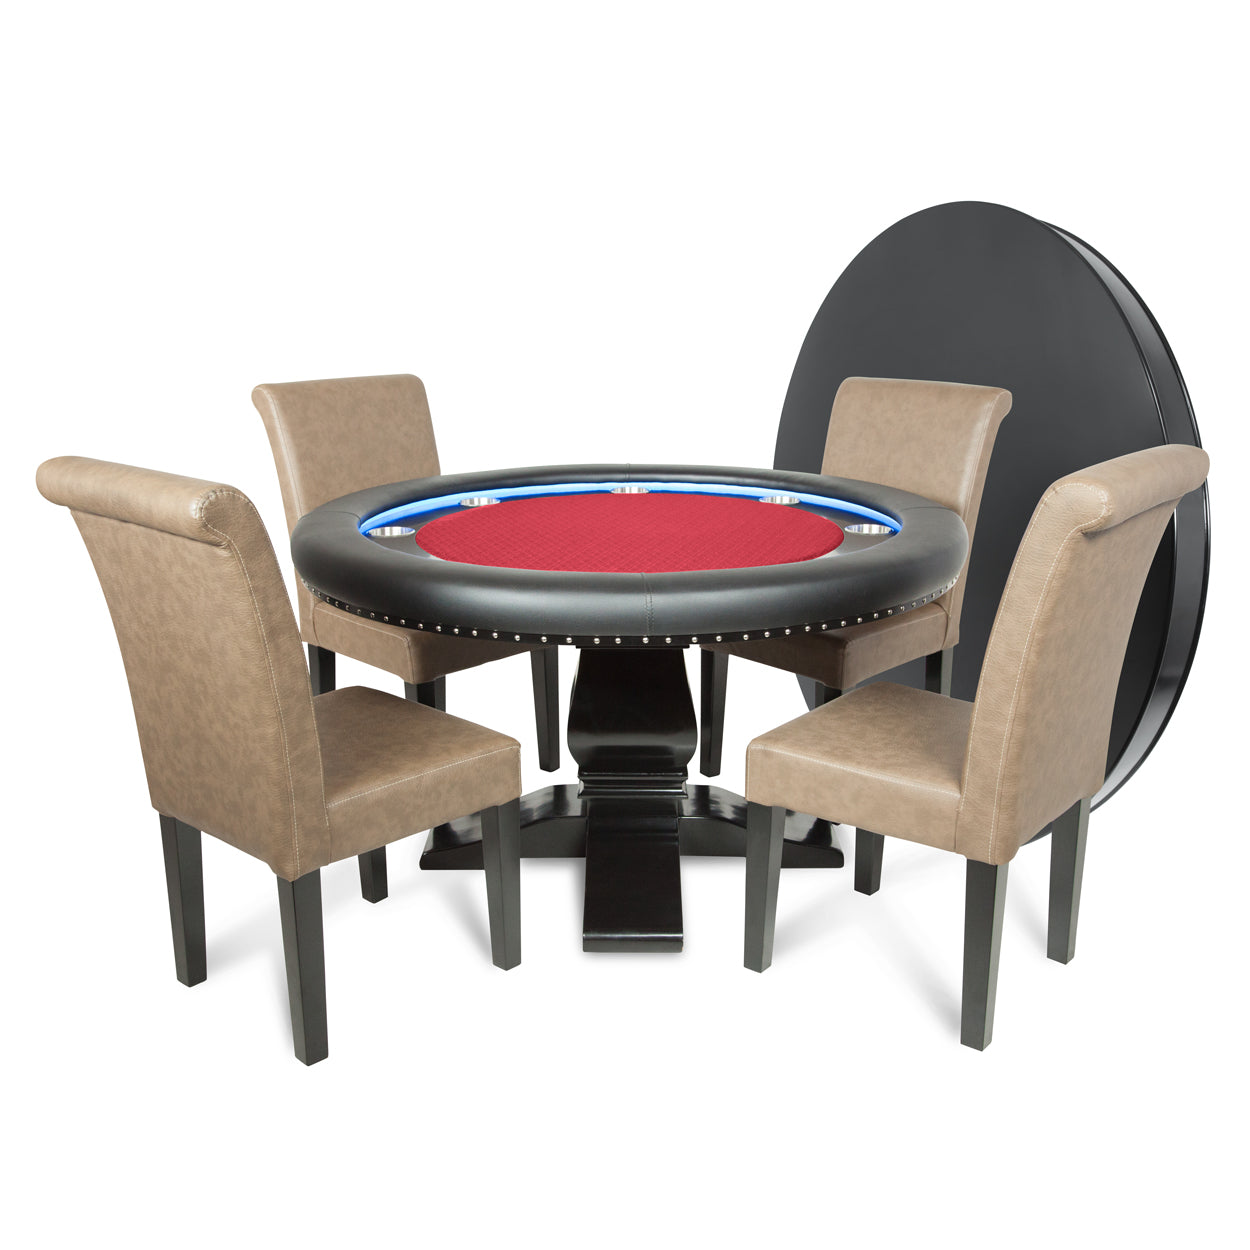 BBO The Ginza LED Poker Table Red Speed Cloth Dining Set